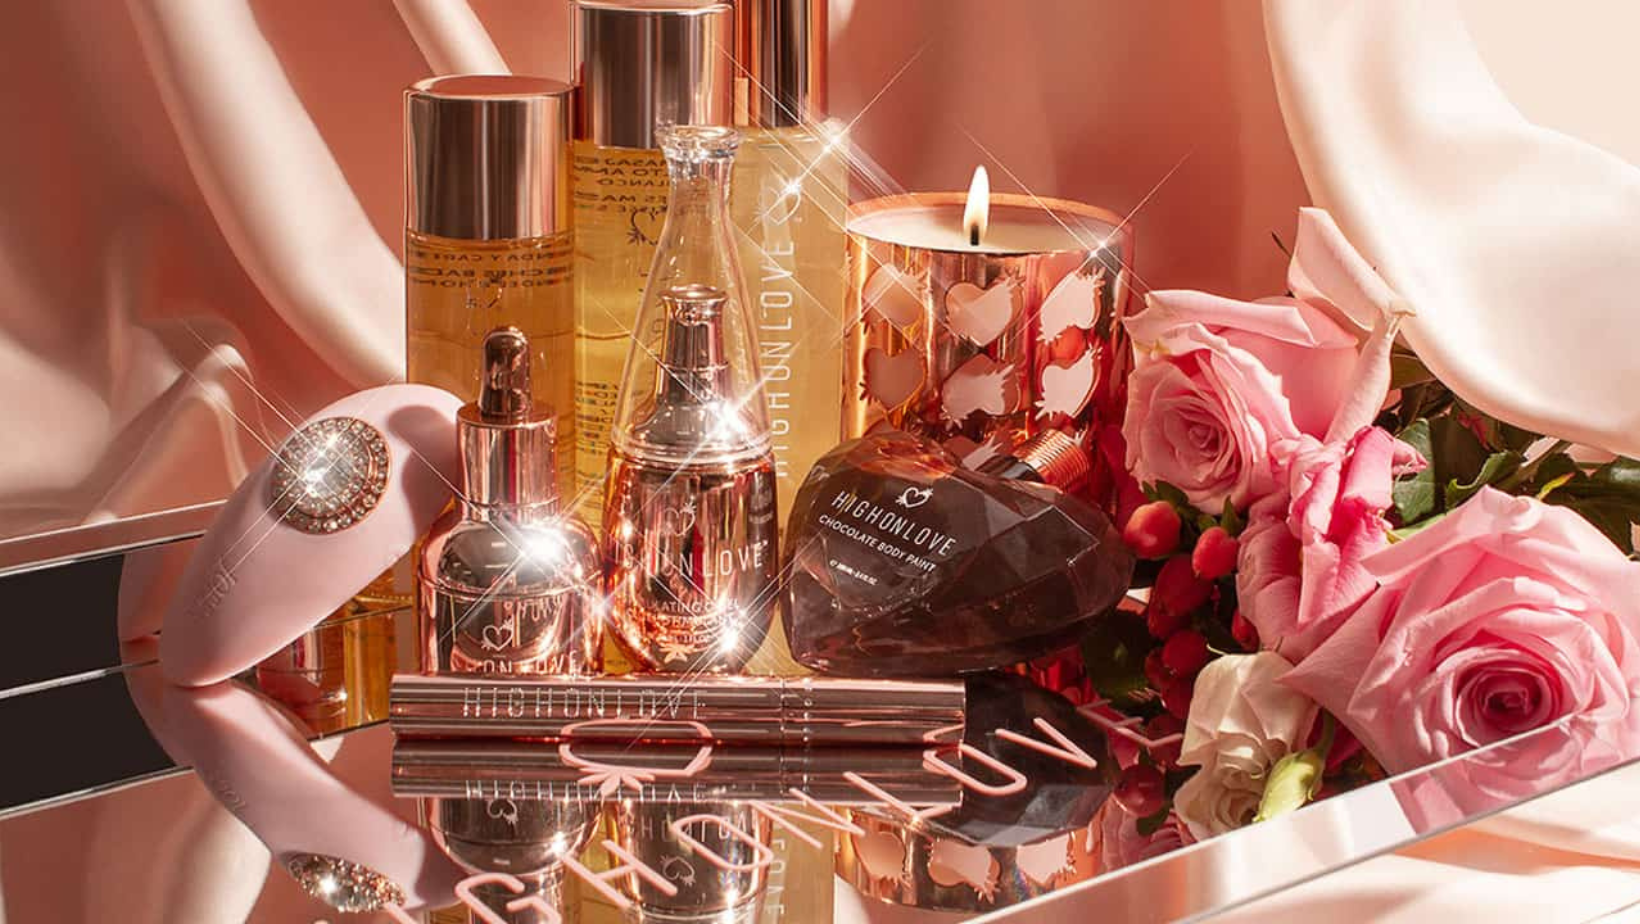 A display of High On Love cosmetics displayed alongside flowers with a satin backdrop